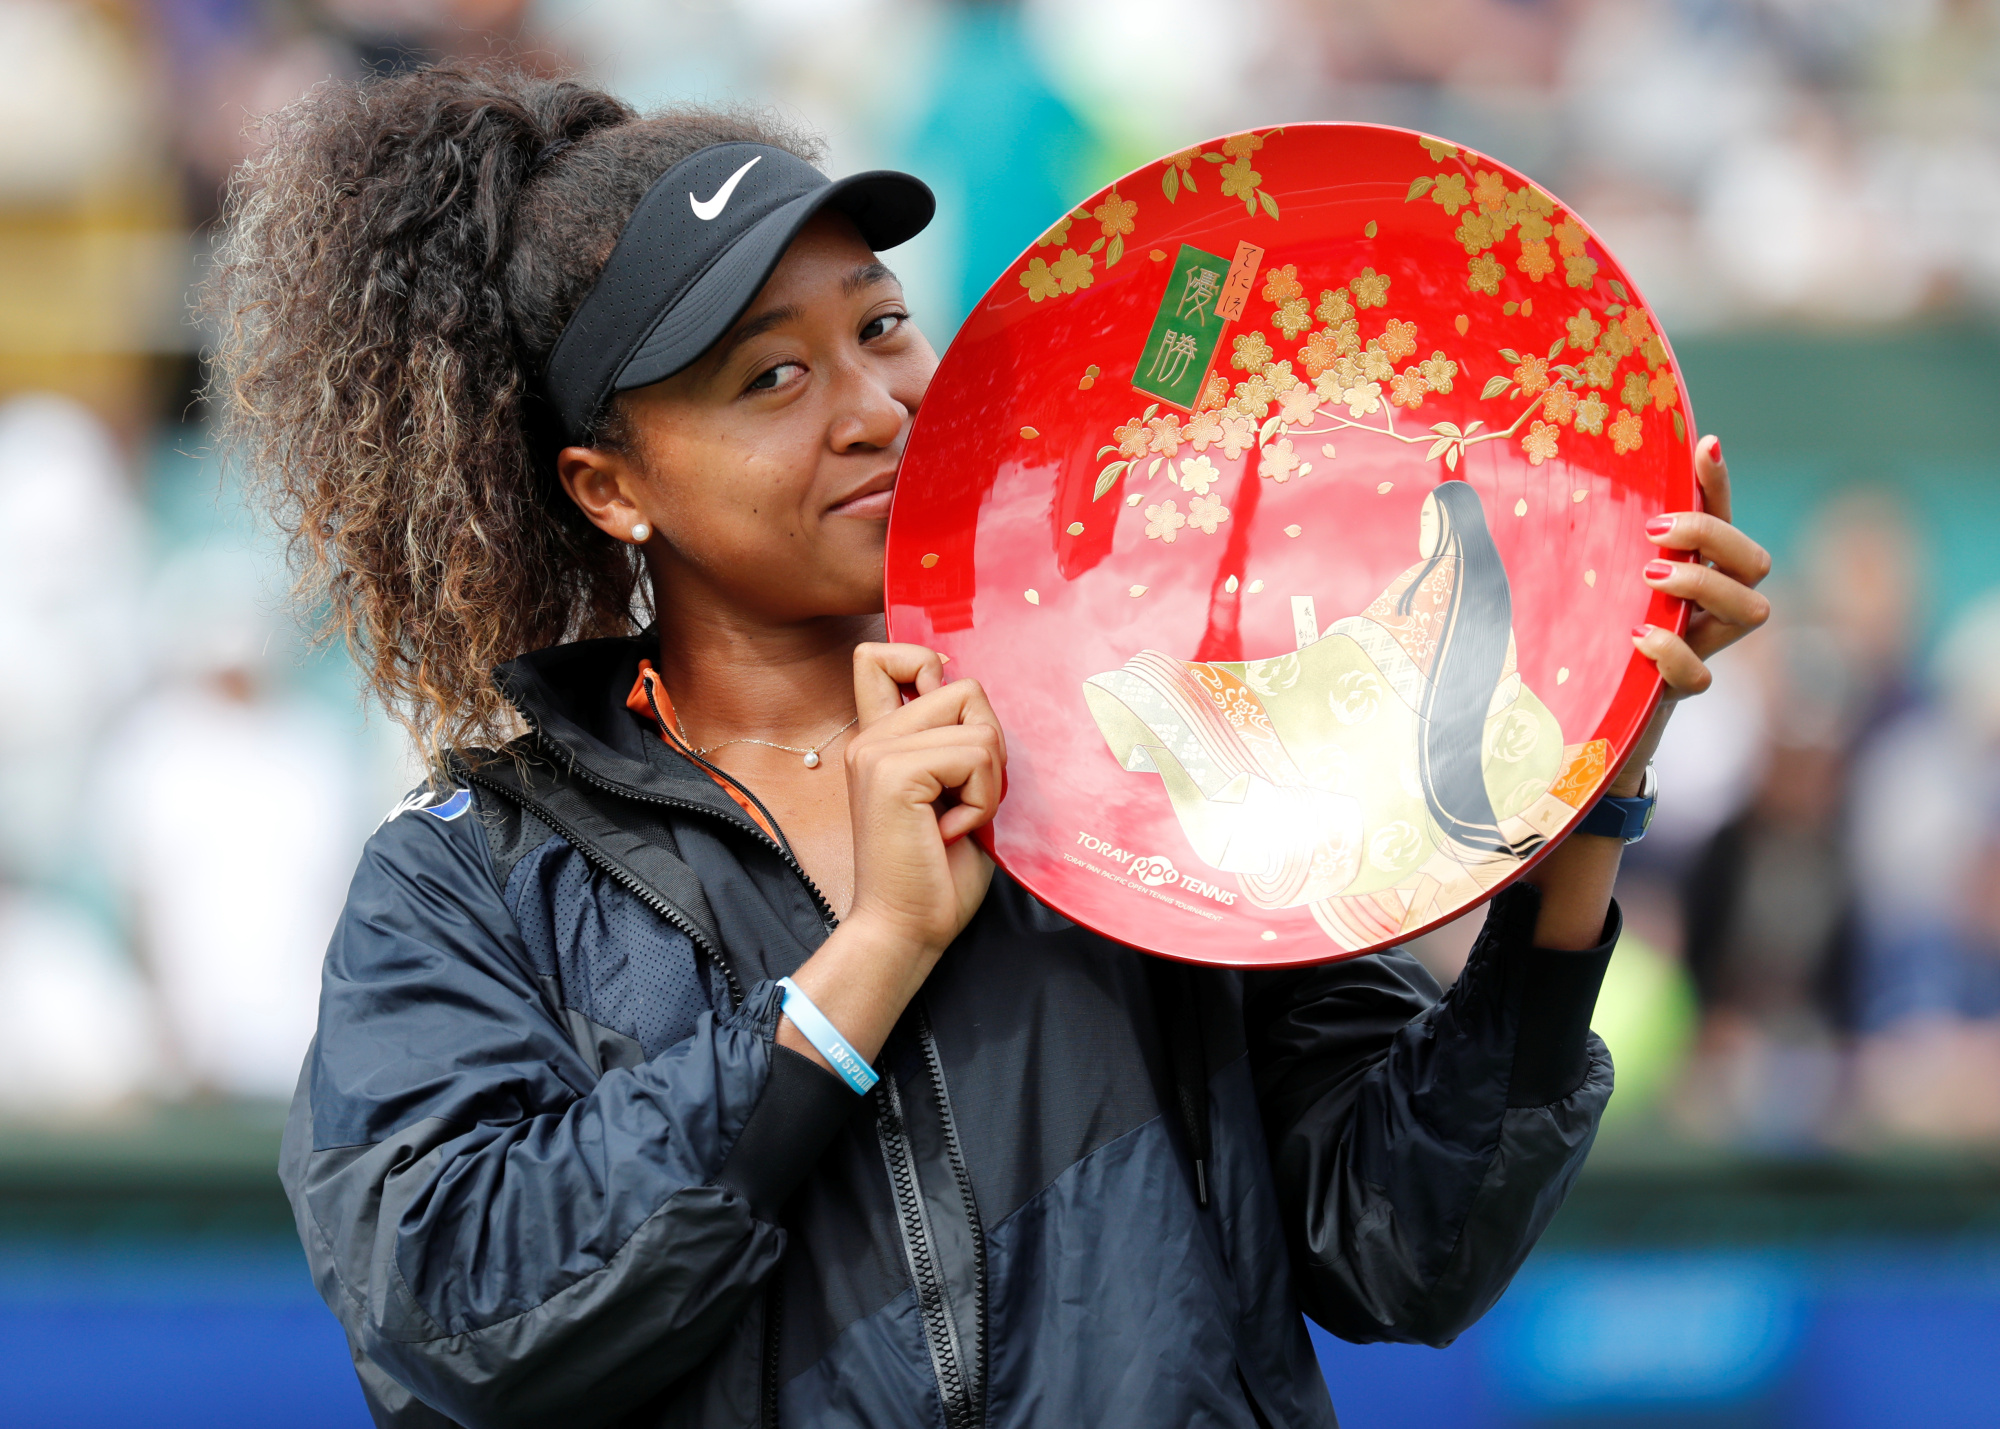 Better things to do: While A Masso performed a comedy set in which they suggested Naomi Osaka 'bleach' her skin, the tennis champion was busy winning the Pan Pacific Open in Osaka. | REUTERS